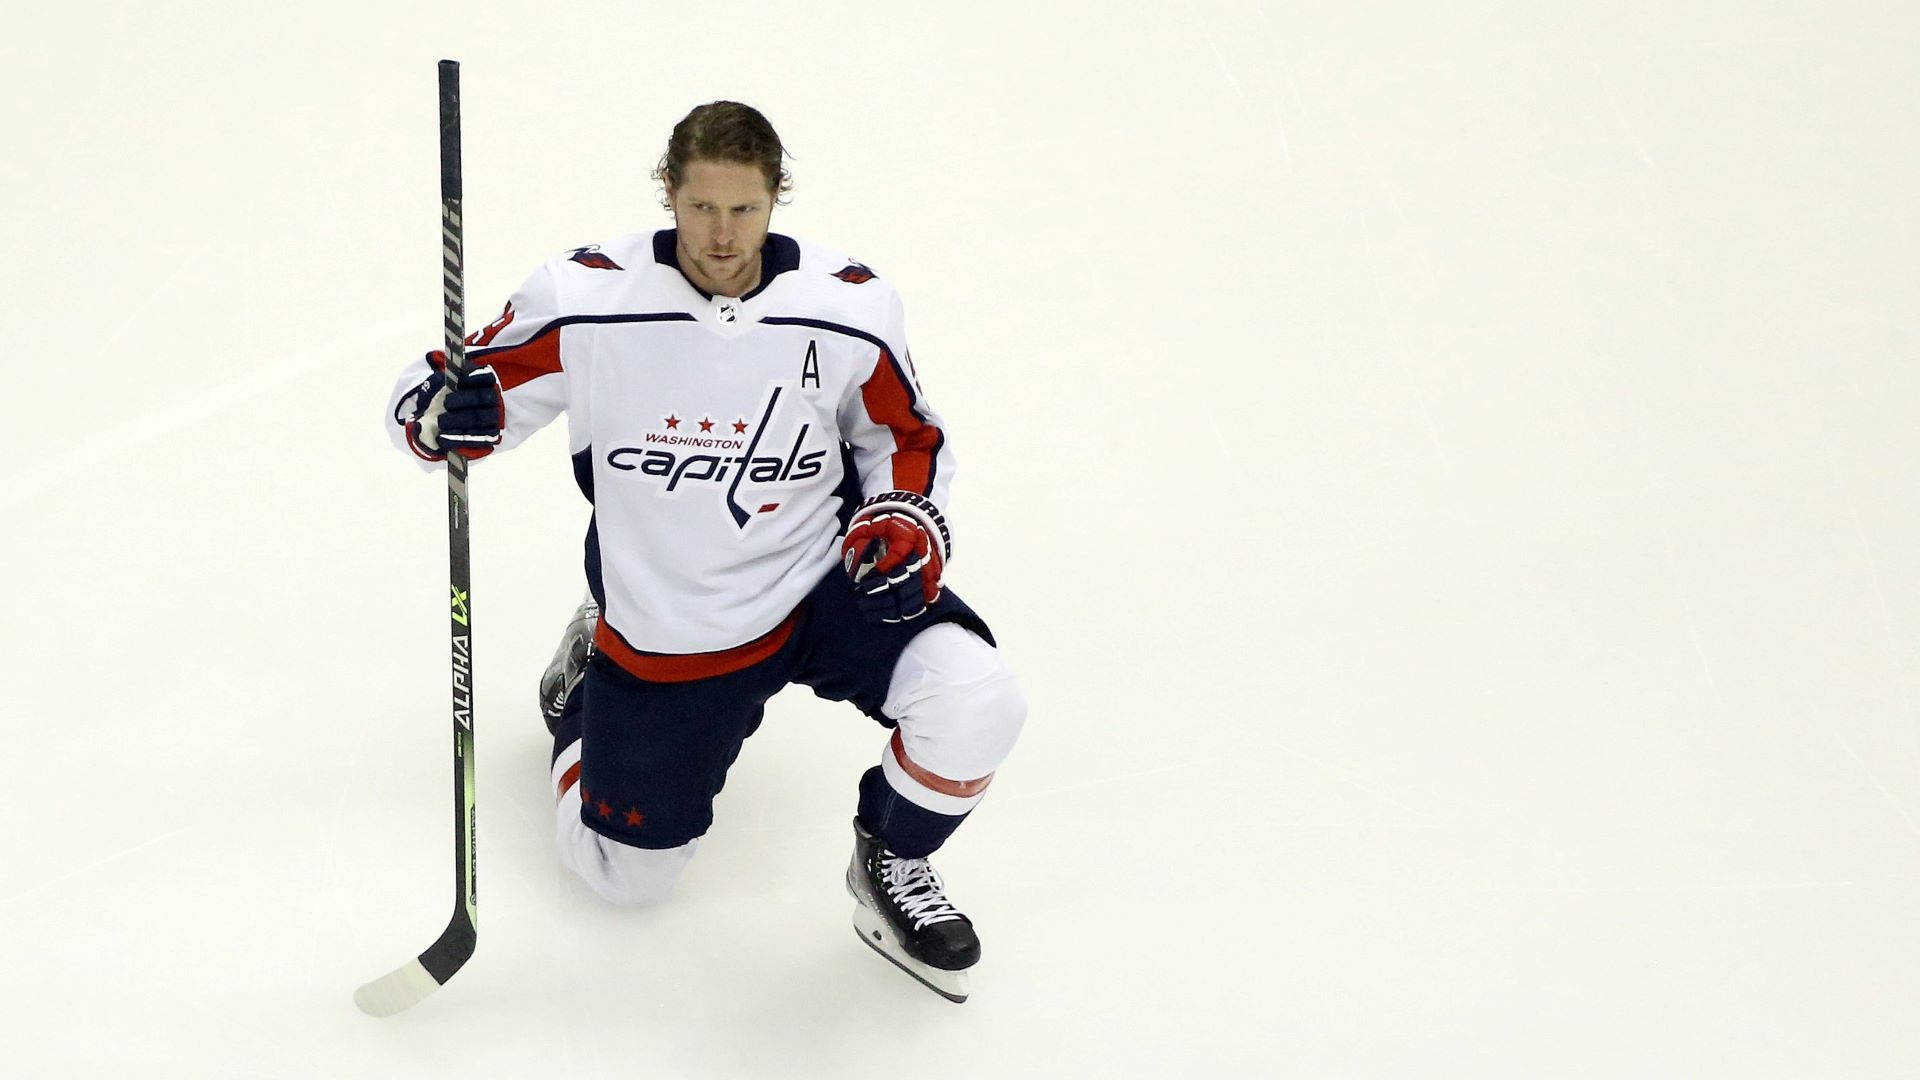 Svenskidrottare Nicklas Backstrom I Vitt. (this Sentence Can Be Used To Describe A Computer Or Mobile Wallpaper Featuring Nicklas Backstrom In A White Outfit Or Background.) Wallpaper